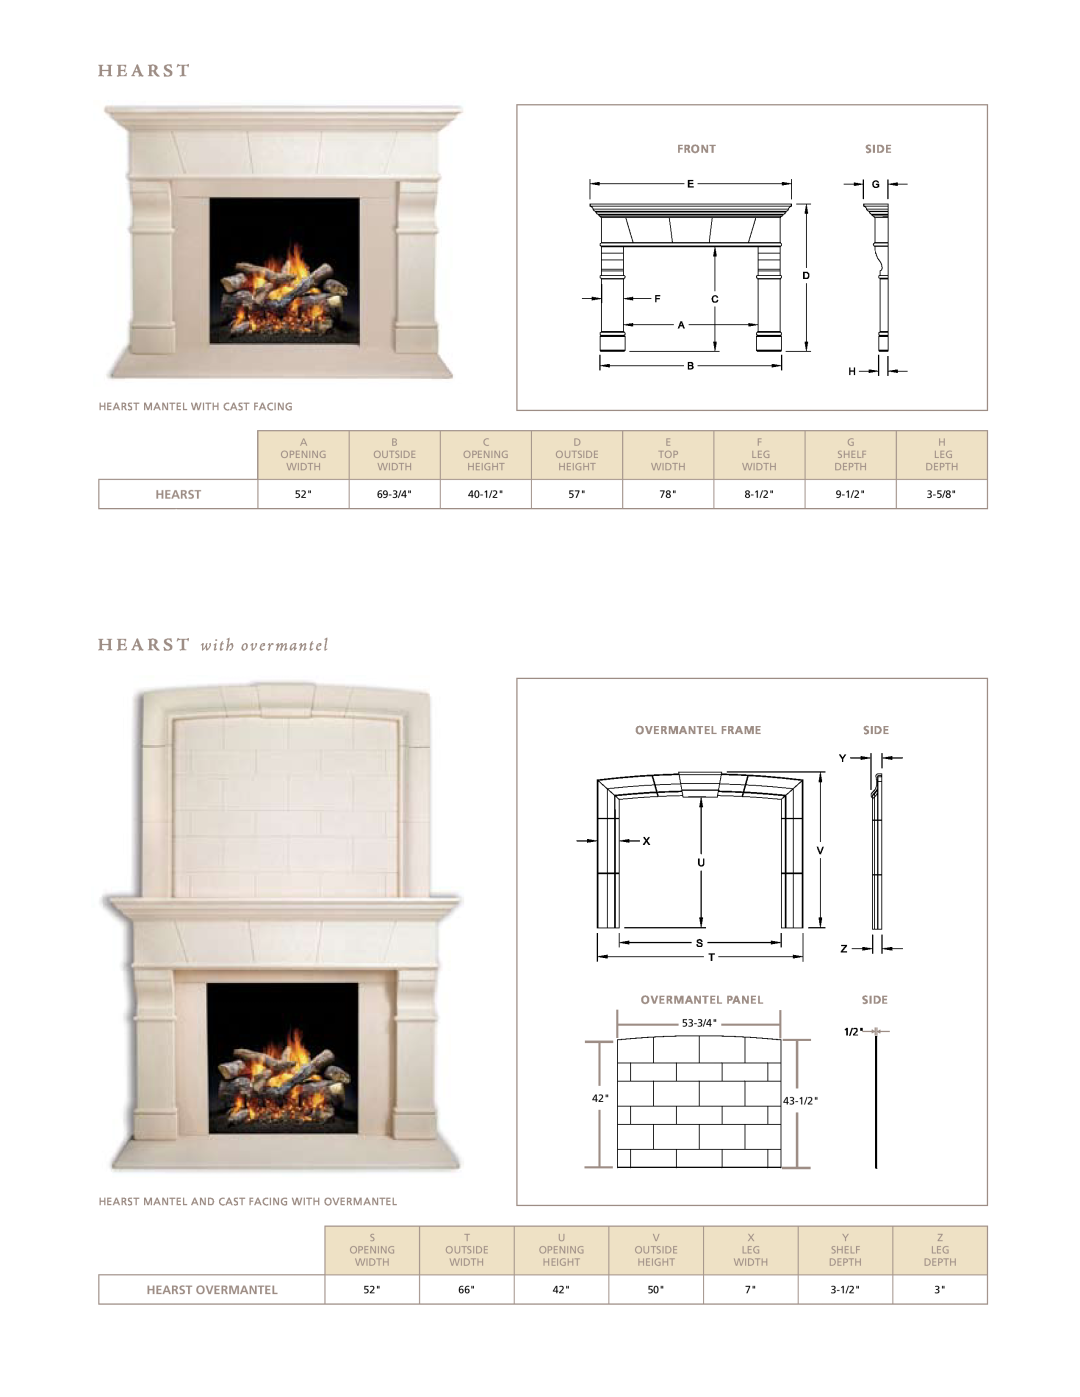 Hearth and Home Technologies Cast Mantels H E A R S T w ith ove r mantel, Frontside, Mantel & Stone, Hearst, Side 